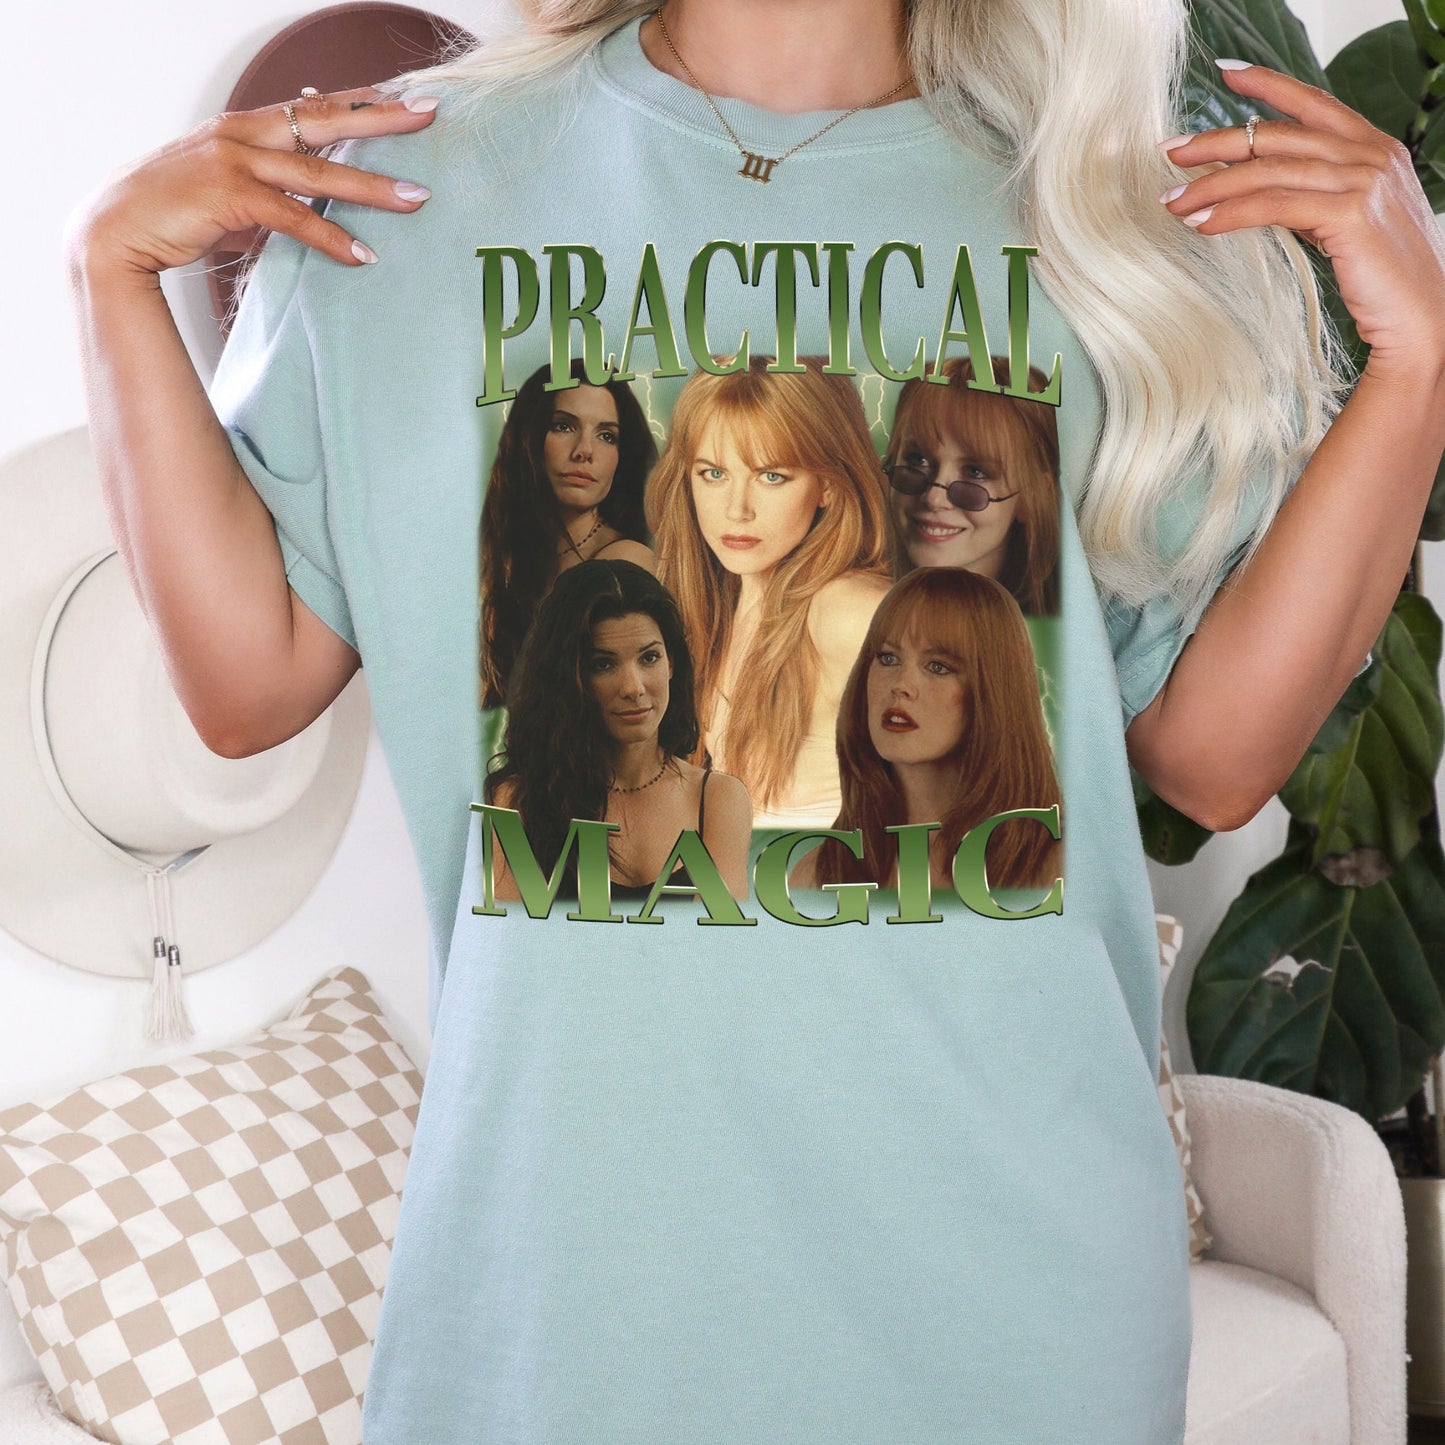 Practical Magic Shirt, The Owen's Sisters, Practical Magic, Witchy shirt, Practical Magic movie, Witchy woman, Basic witch, Witchy aesthetic